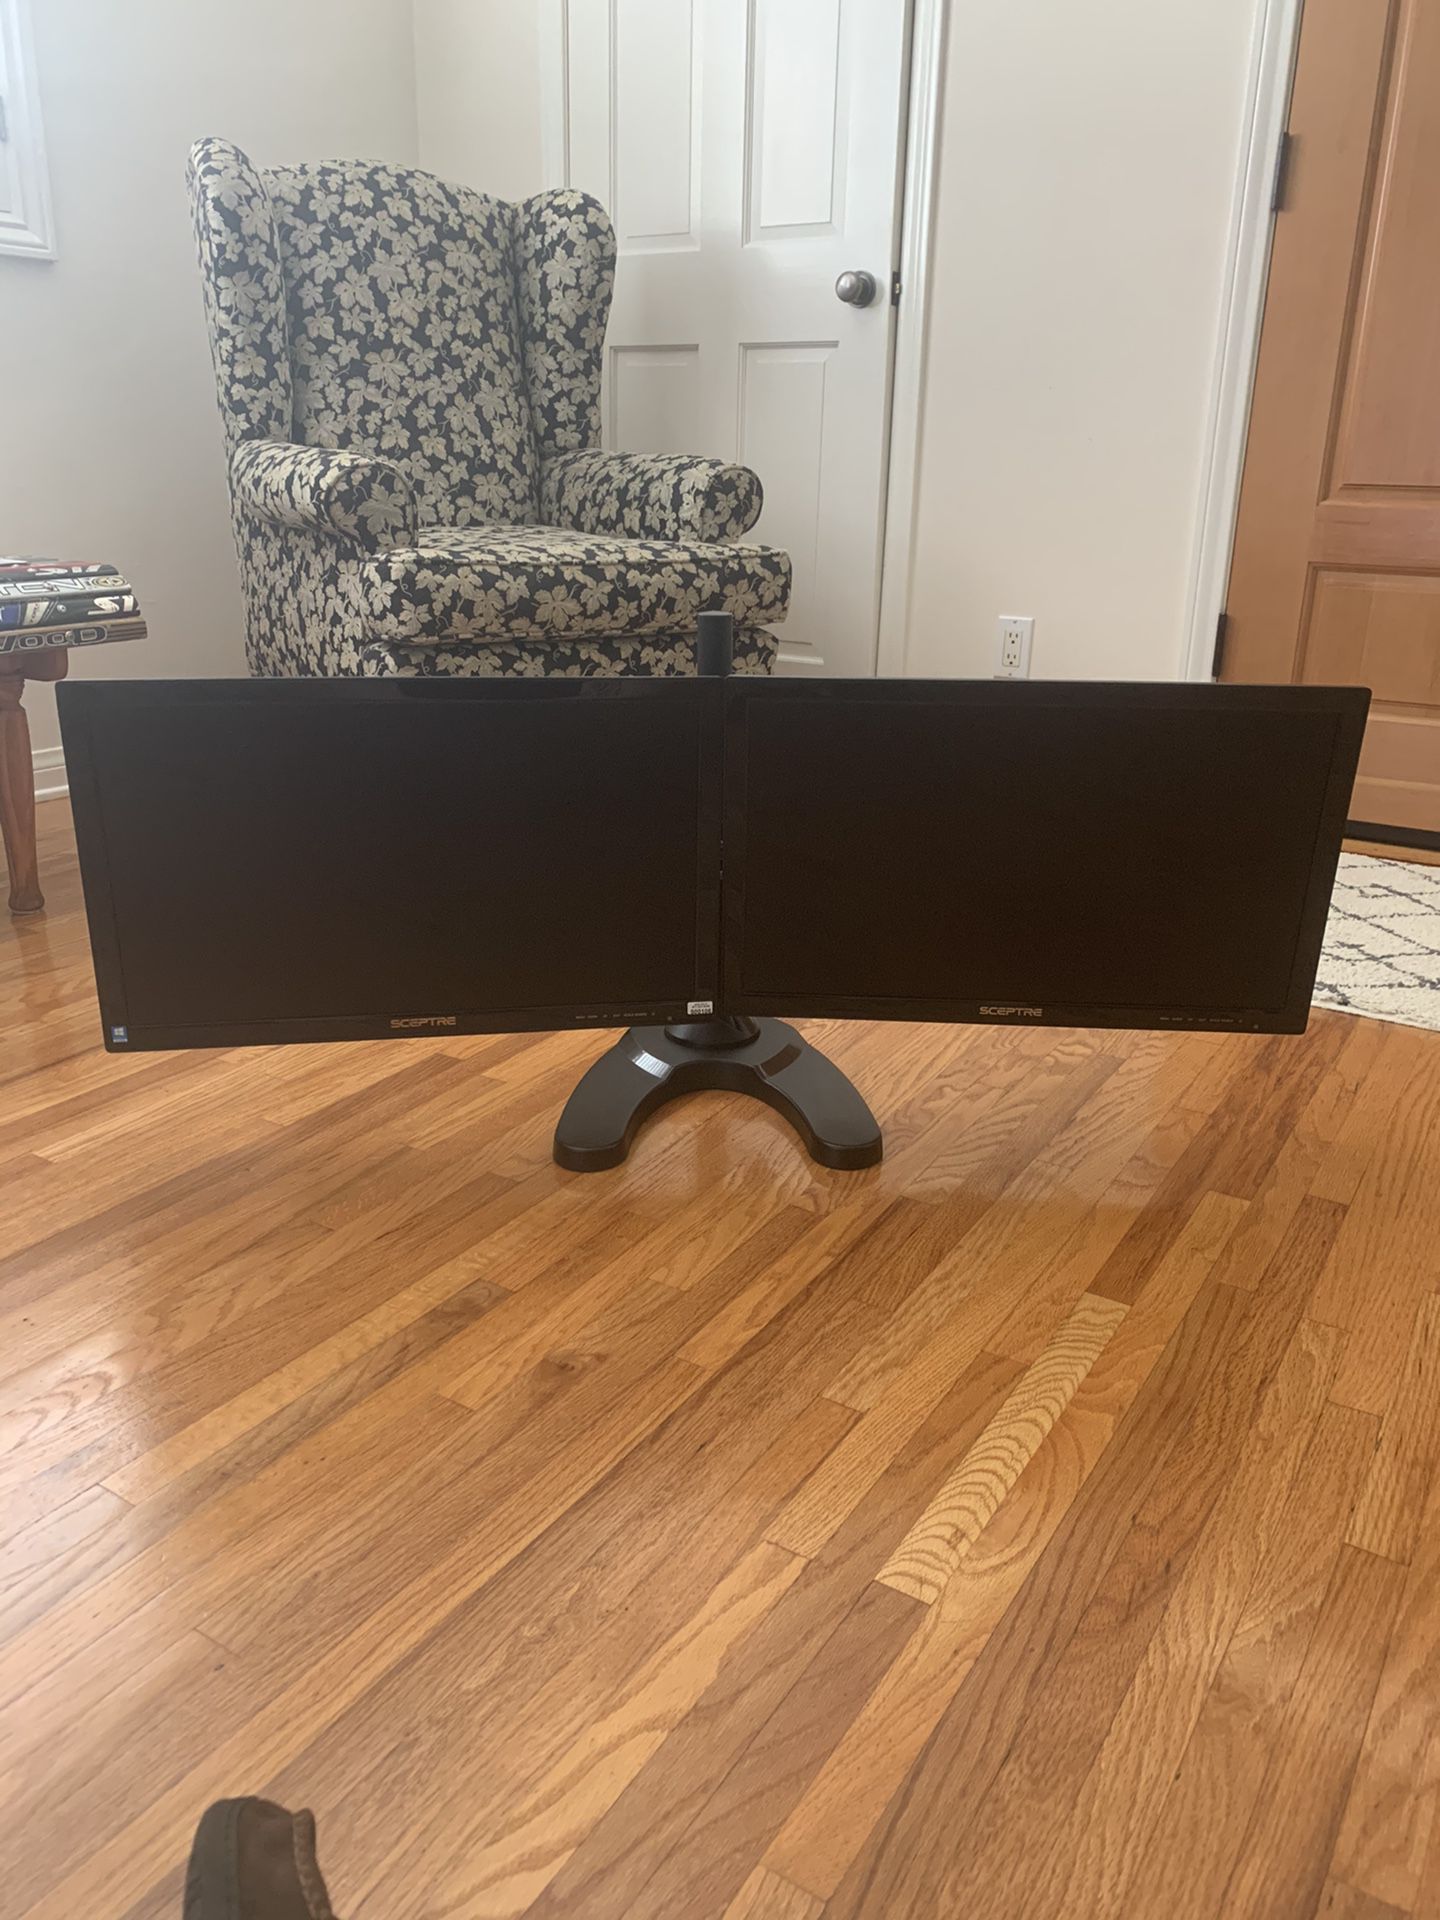 Spectre 24” Monitors on High Quality Durable Stand